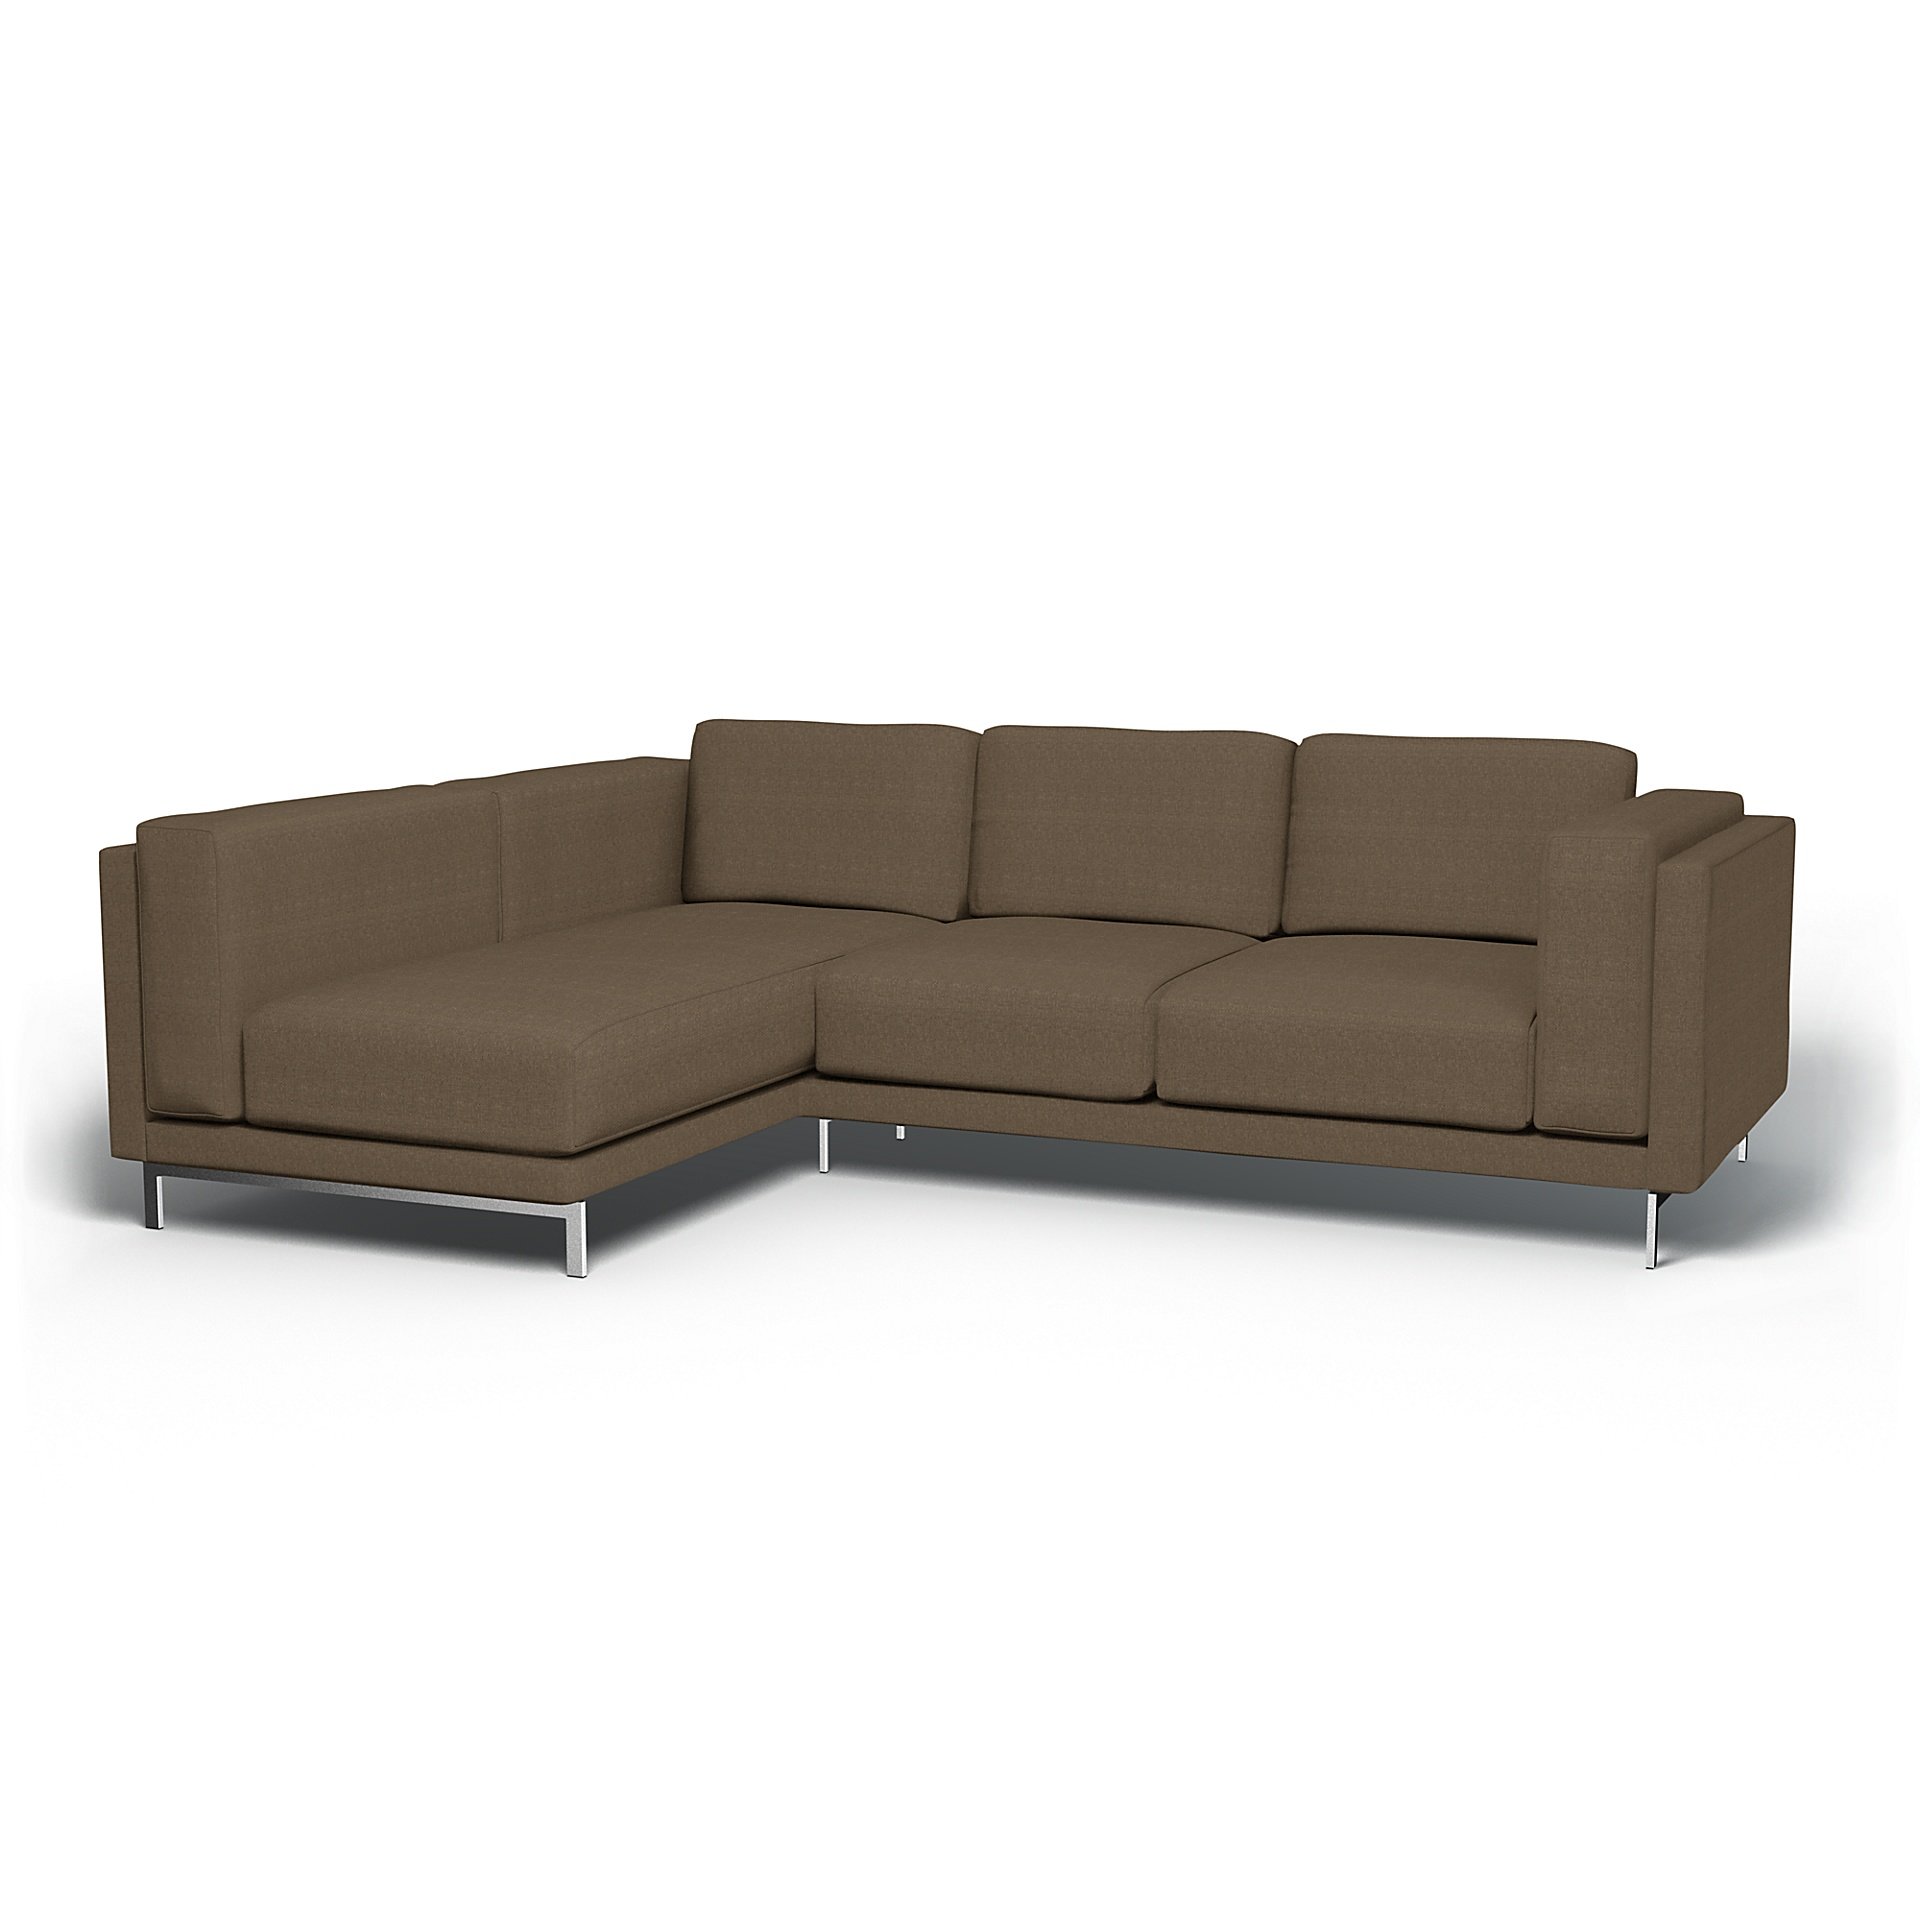 IKEA - Nockeby 3 Seater Sofa with Left Chaise Cover, Dark Taupe, Boucle & Texture - Bemz